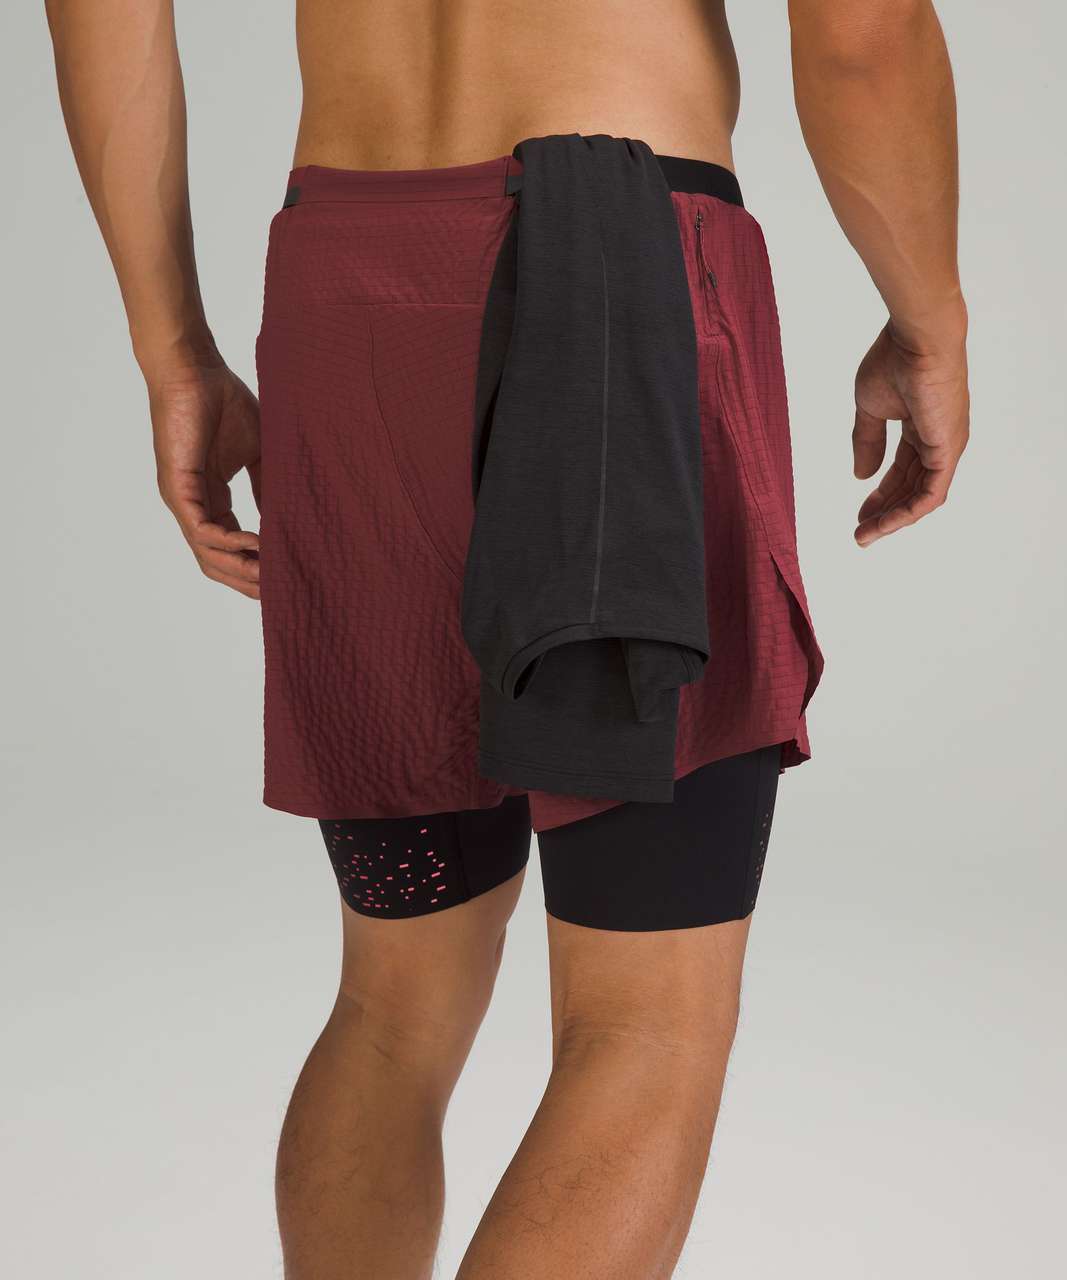 Lululemon Surge Lined Short 6" *Special Edition - Mulled Wine / Inflect Textured Raw Linen Multi